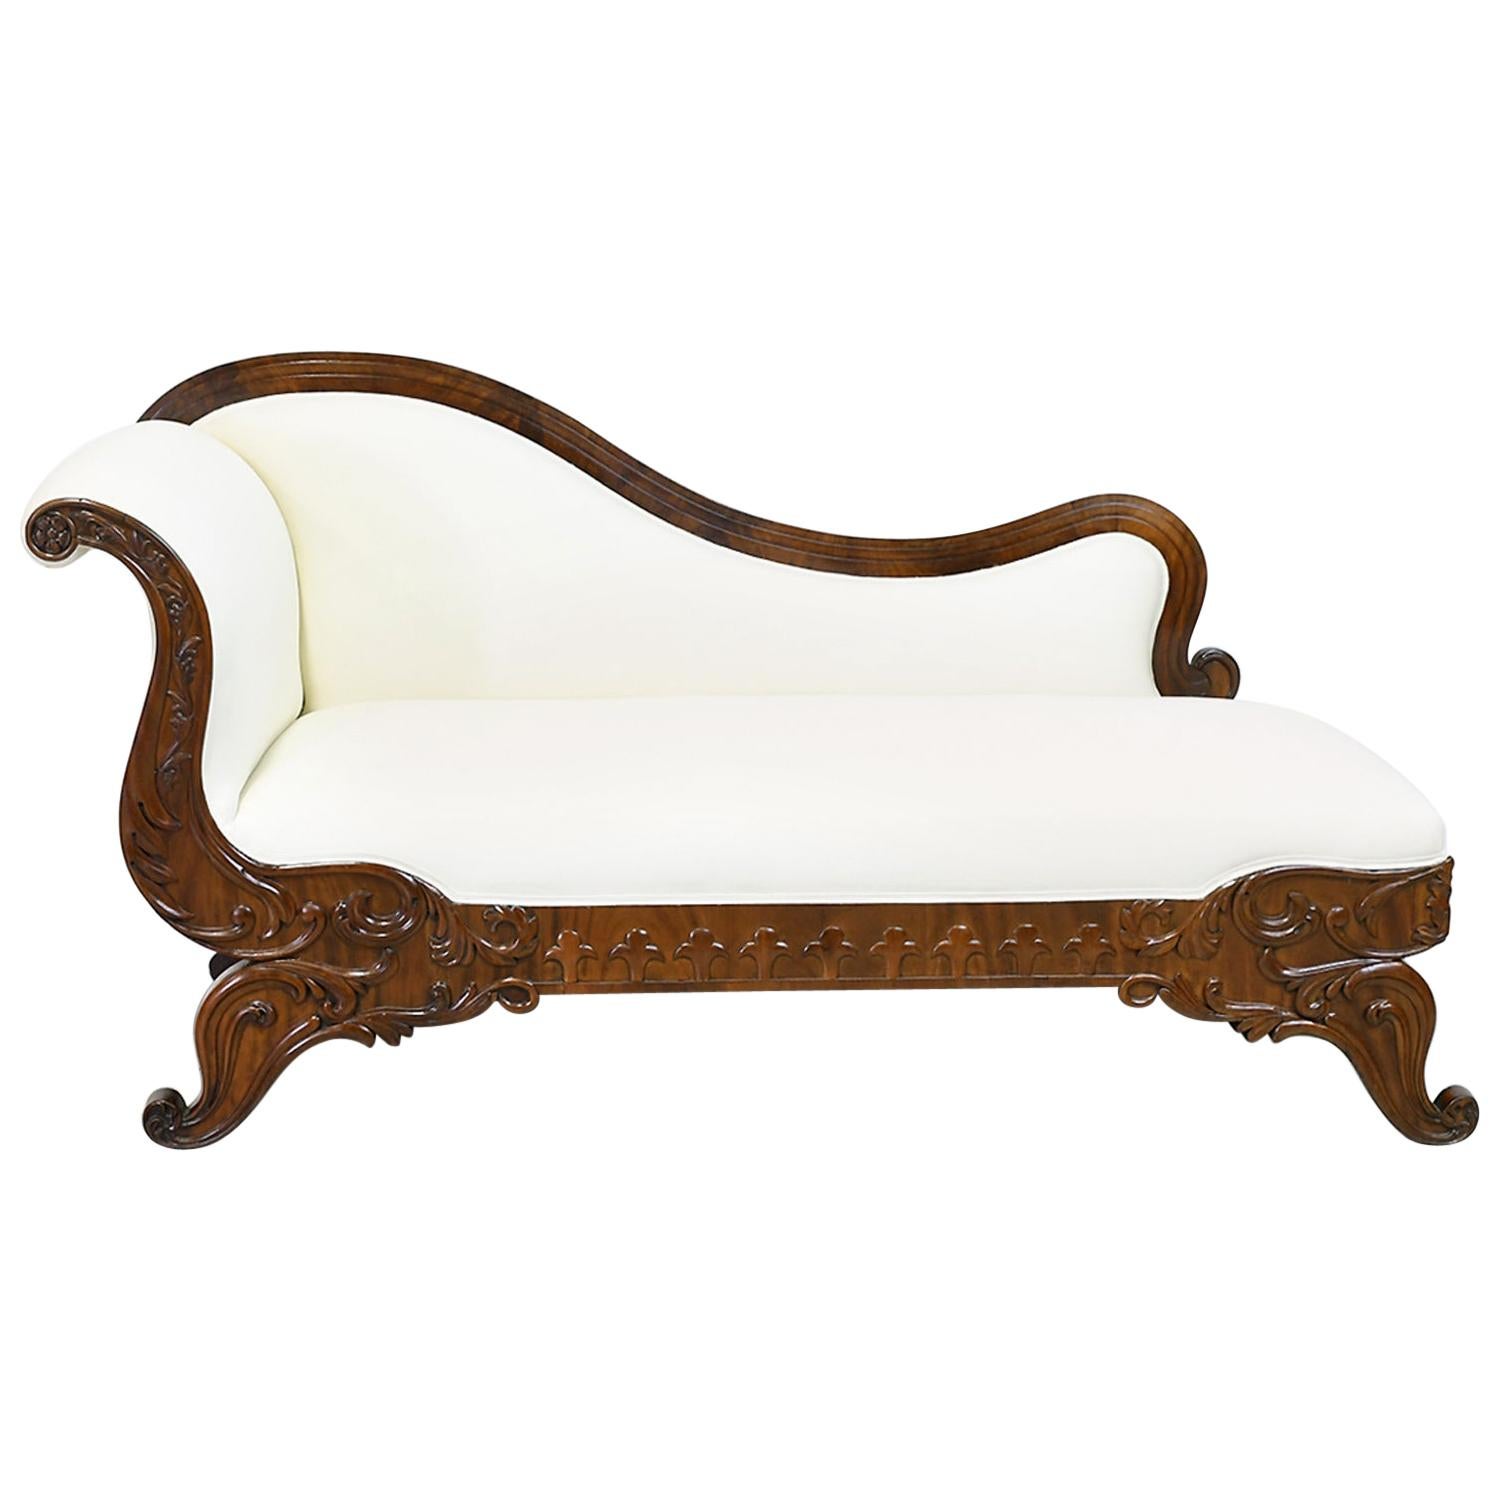 19th Century Empire Meridienne or Recamier in Carved Mahogany with Upholstery